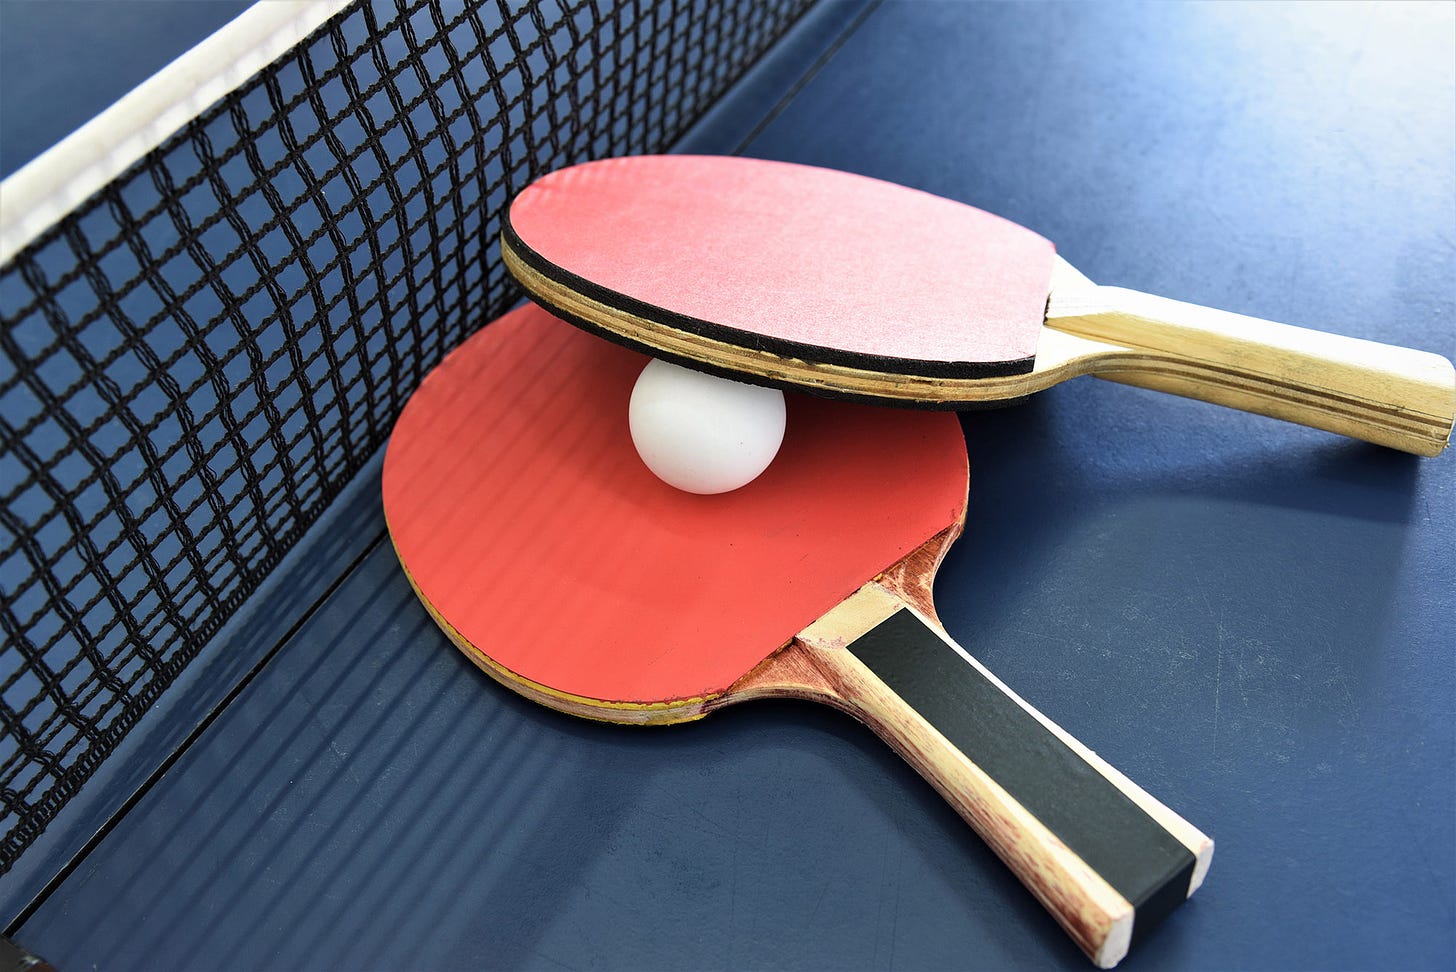 Ping-Pong and Larry David Are Pretty, Pretty Good for DraftKings - Bloomberg